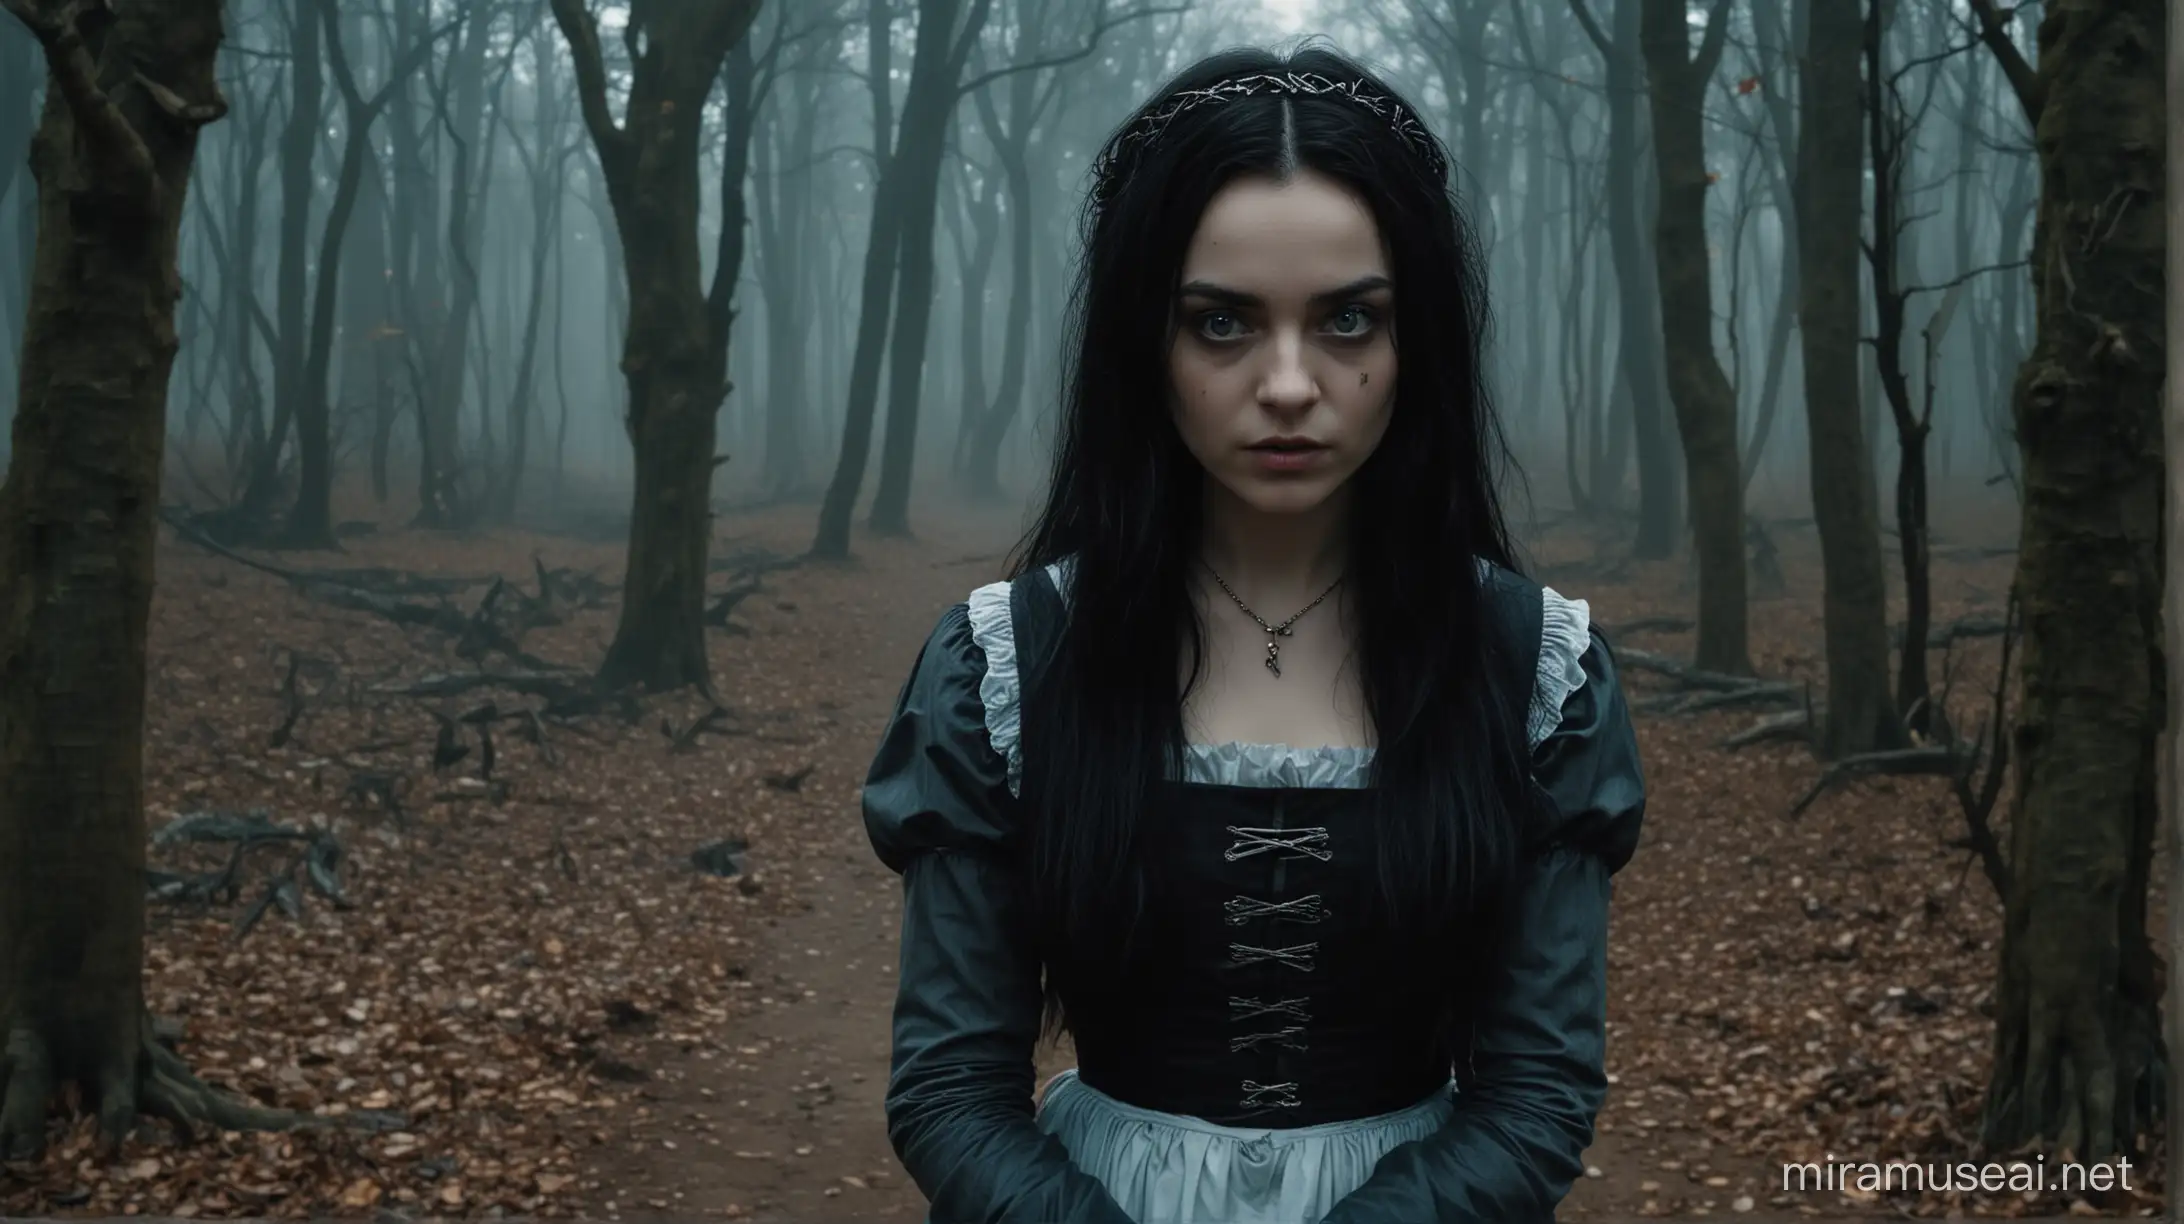 Alice in Wonderland, darkness, Blair witch, Middle Ages, fantasy, black hair